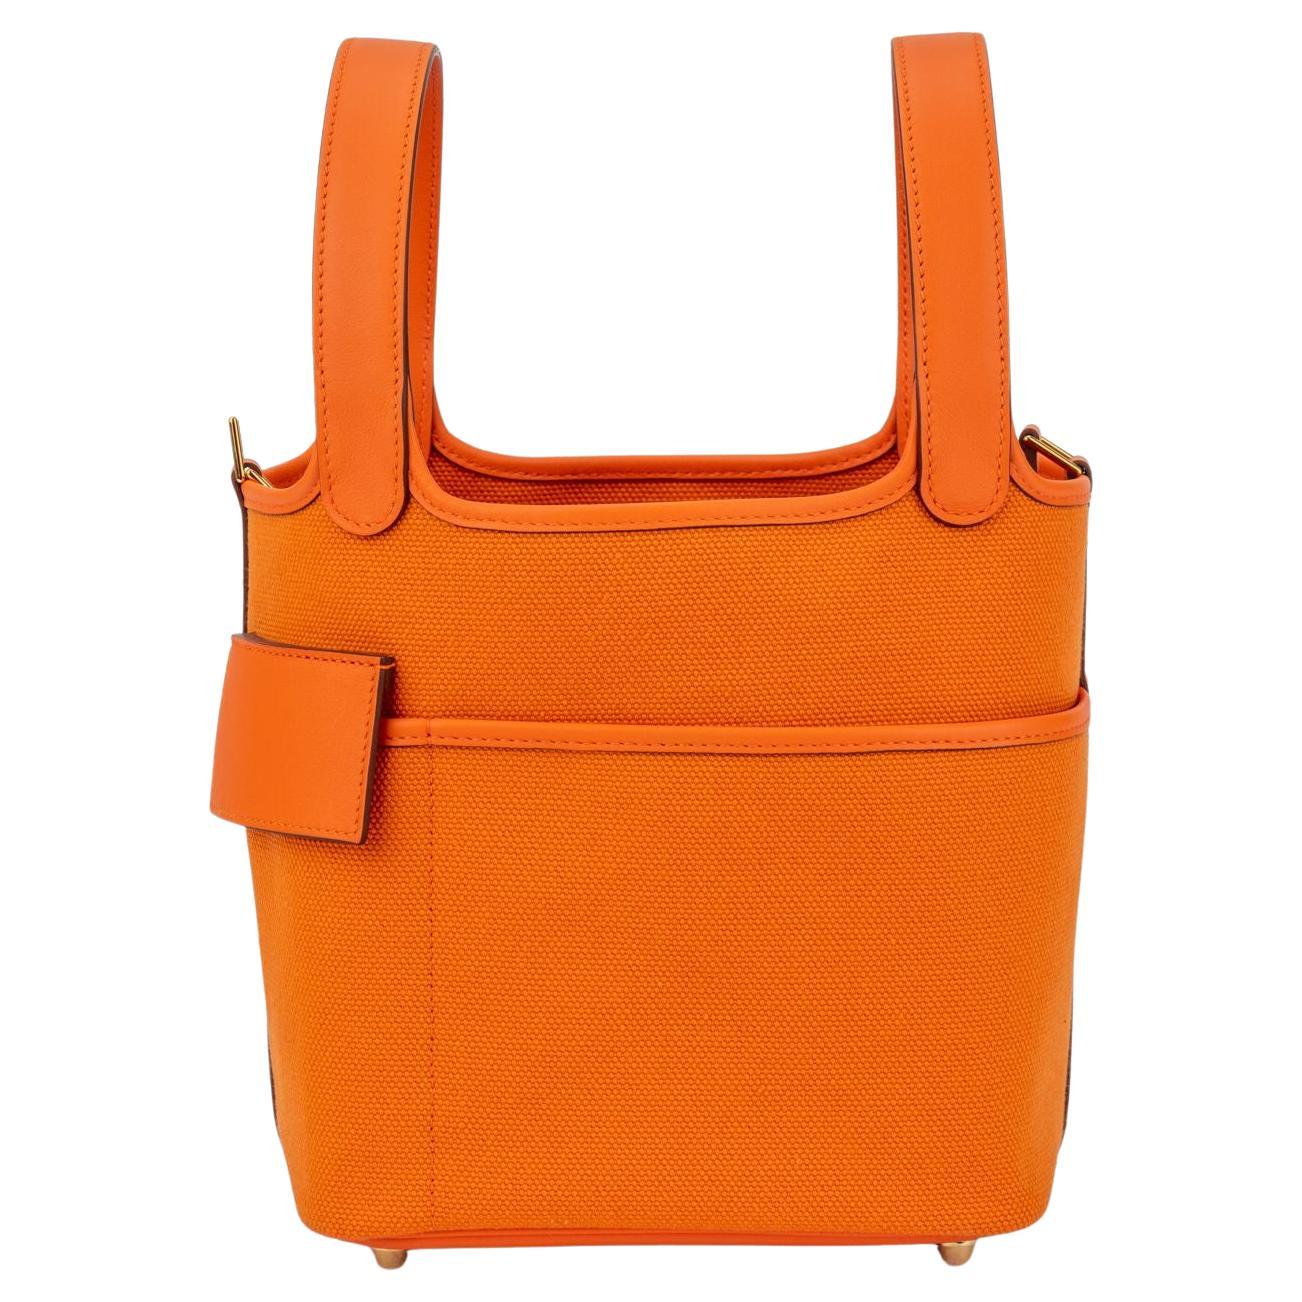 Hermès  new in box Orange Swift and Toile Geoland Cargo Picotin Lock 18,  gold tone hardware . This chic and lovely tote is crafted of sturdy canvas in orange. The bag features looping leather top handles, exterior pockets, and gold tone hardware,